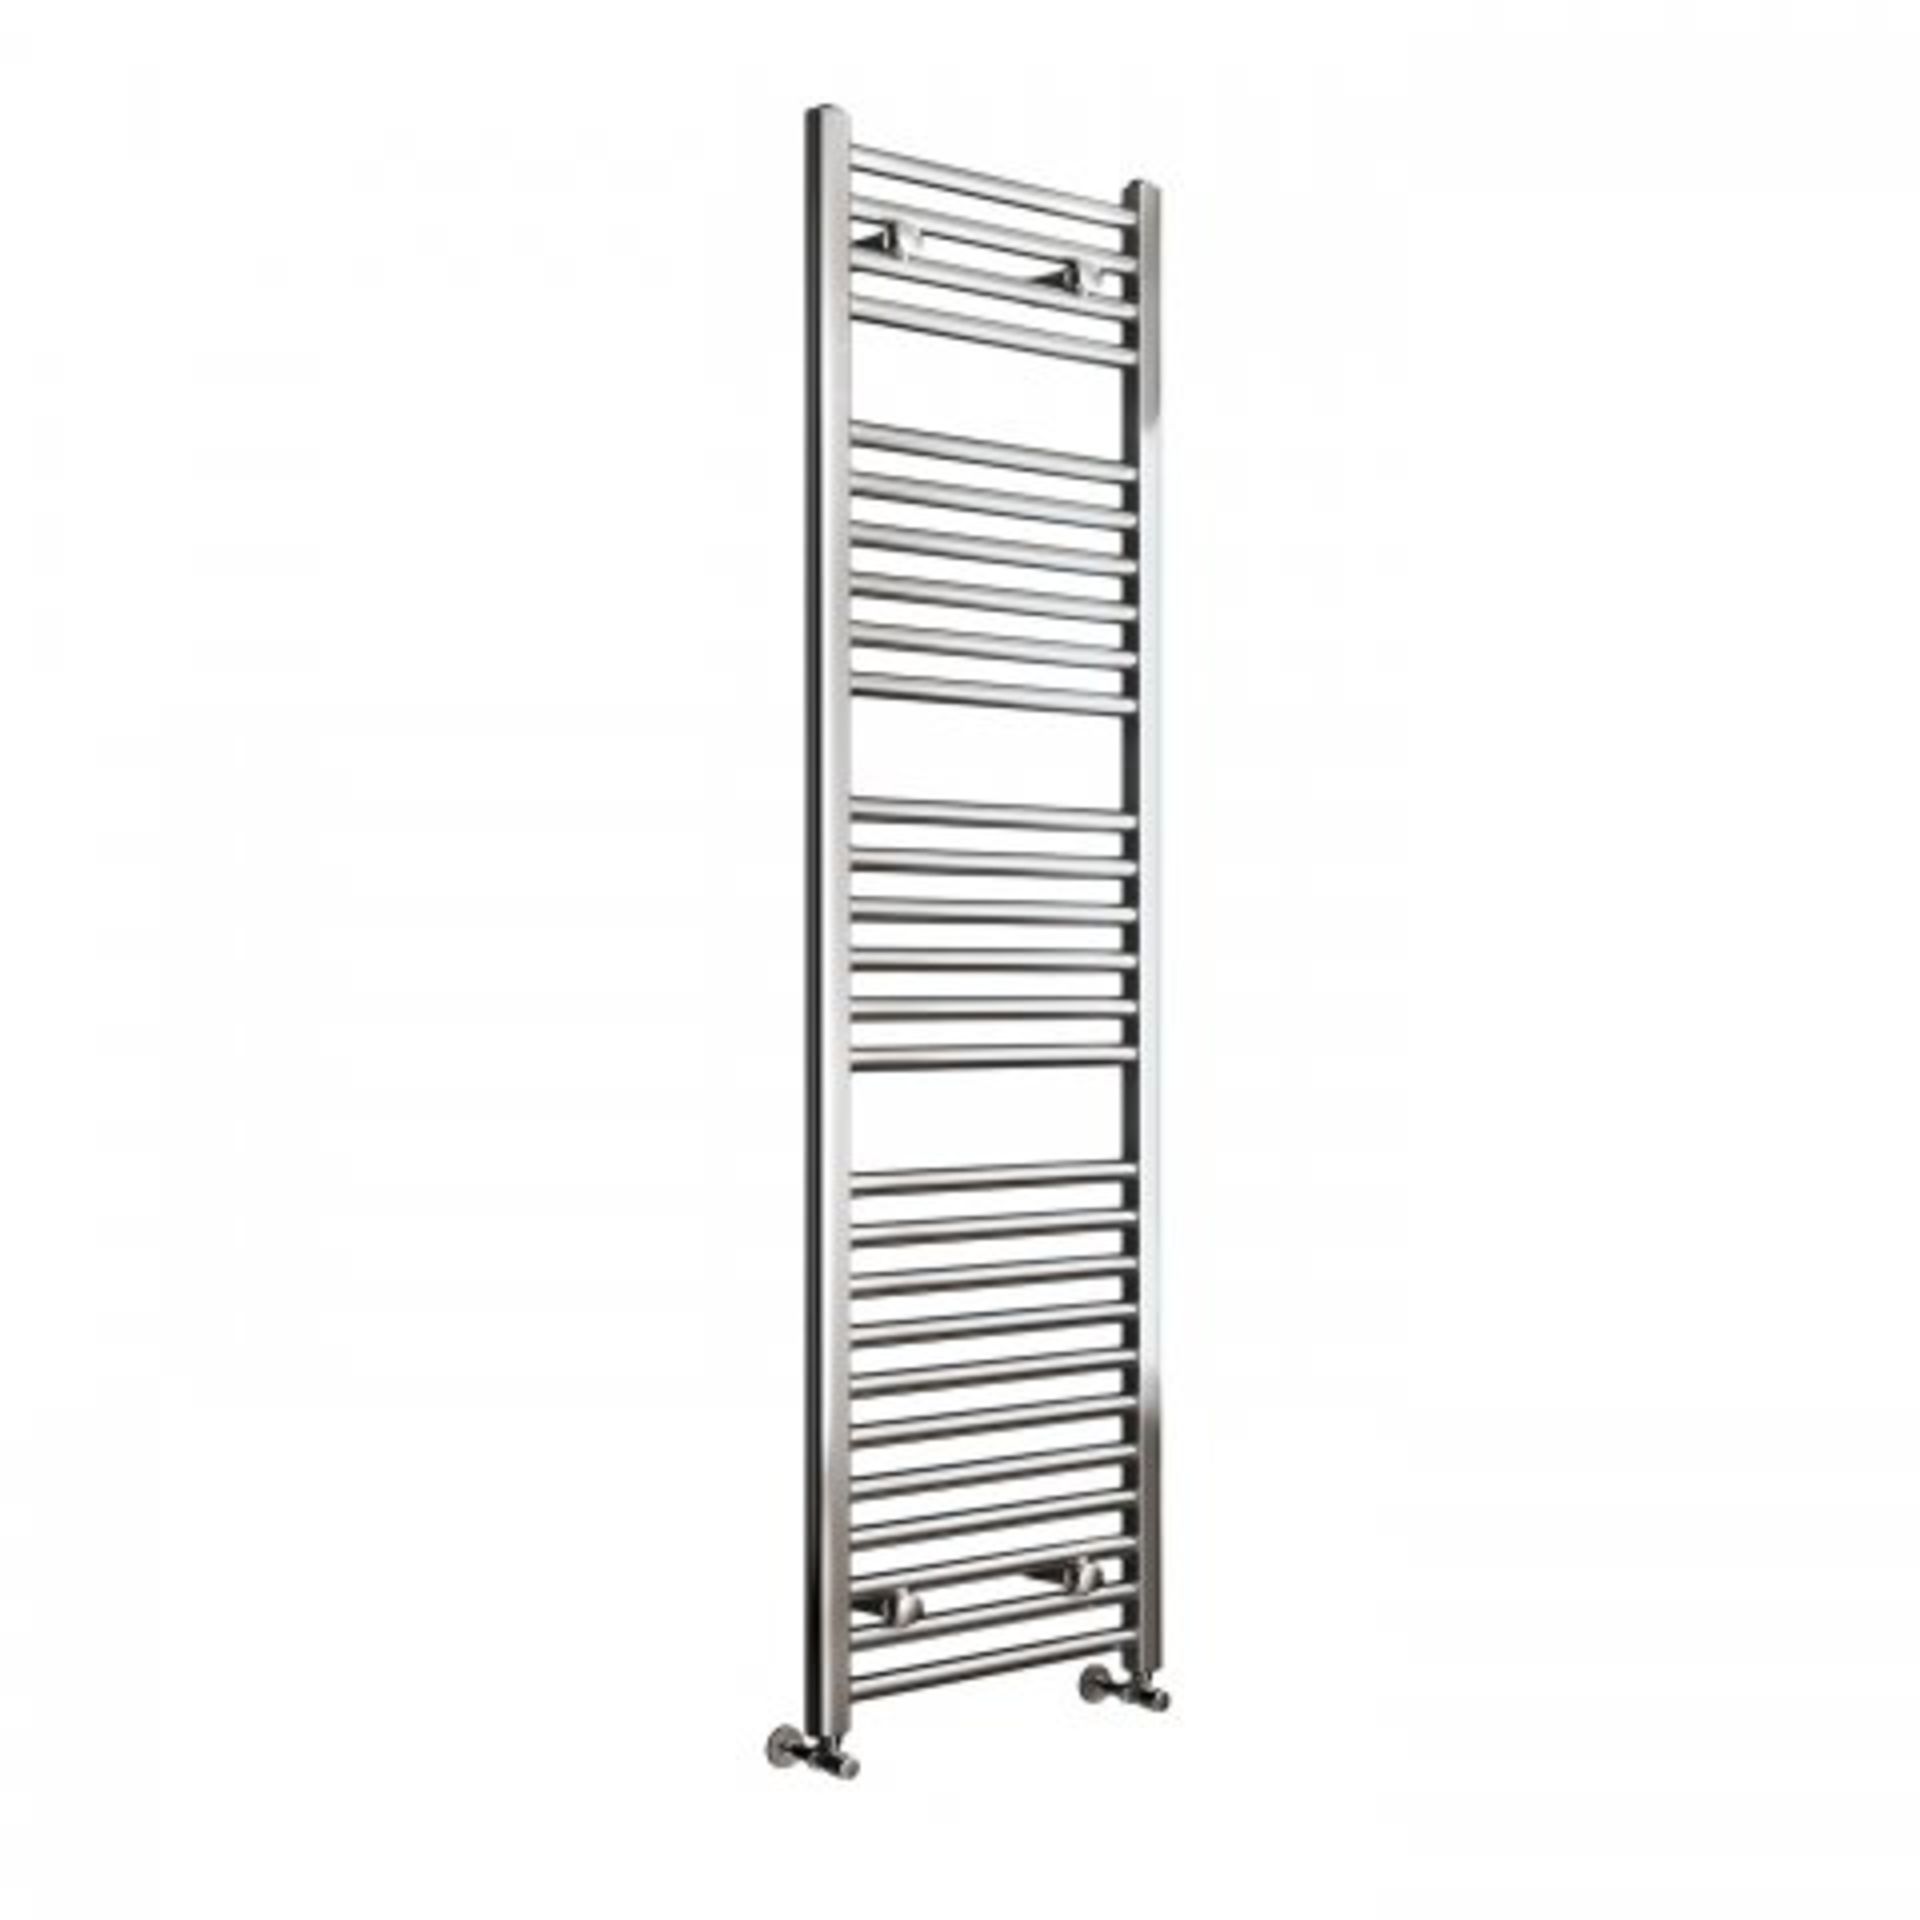 (H182) 1600x450mm - 25mm Tubes - Chrome Heated Straight Rail Ladder Towel Radiator. RRP £175.98. The - Image 2 of 3